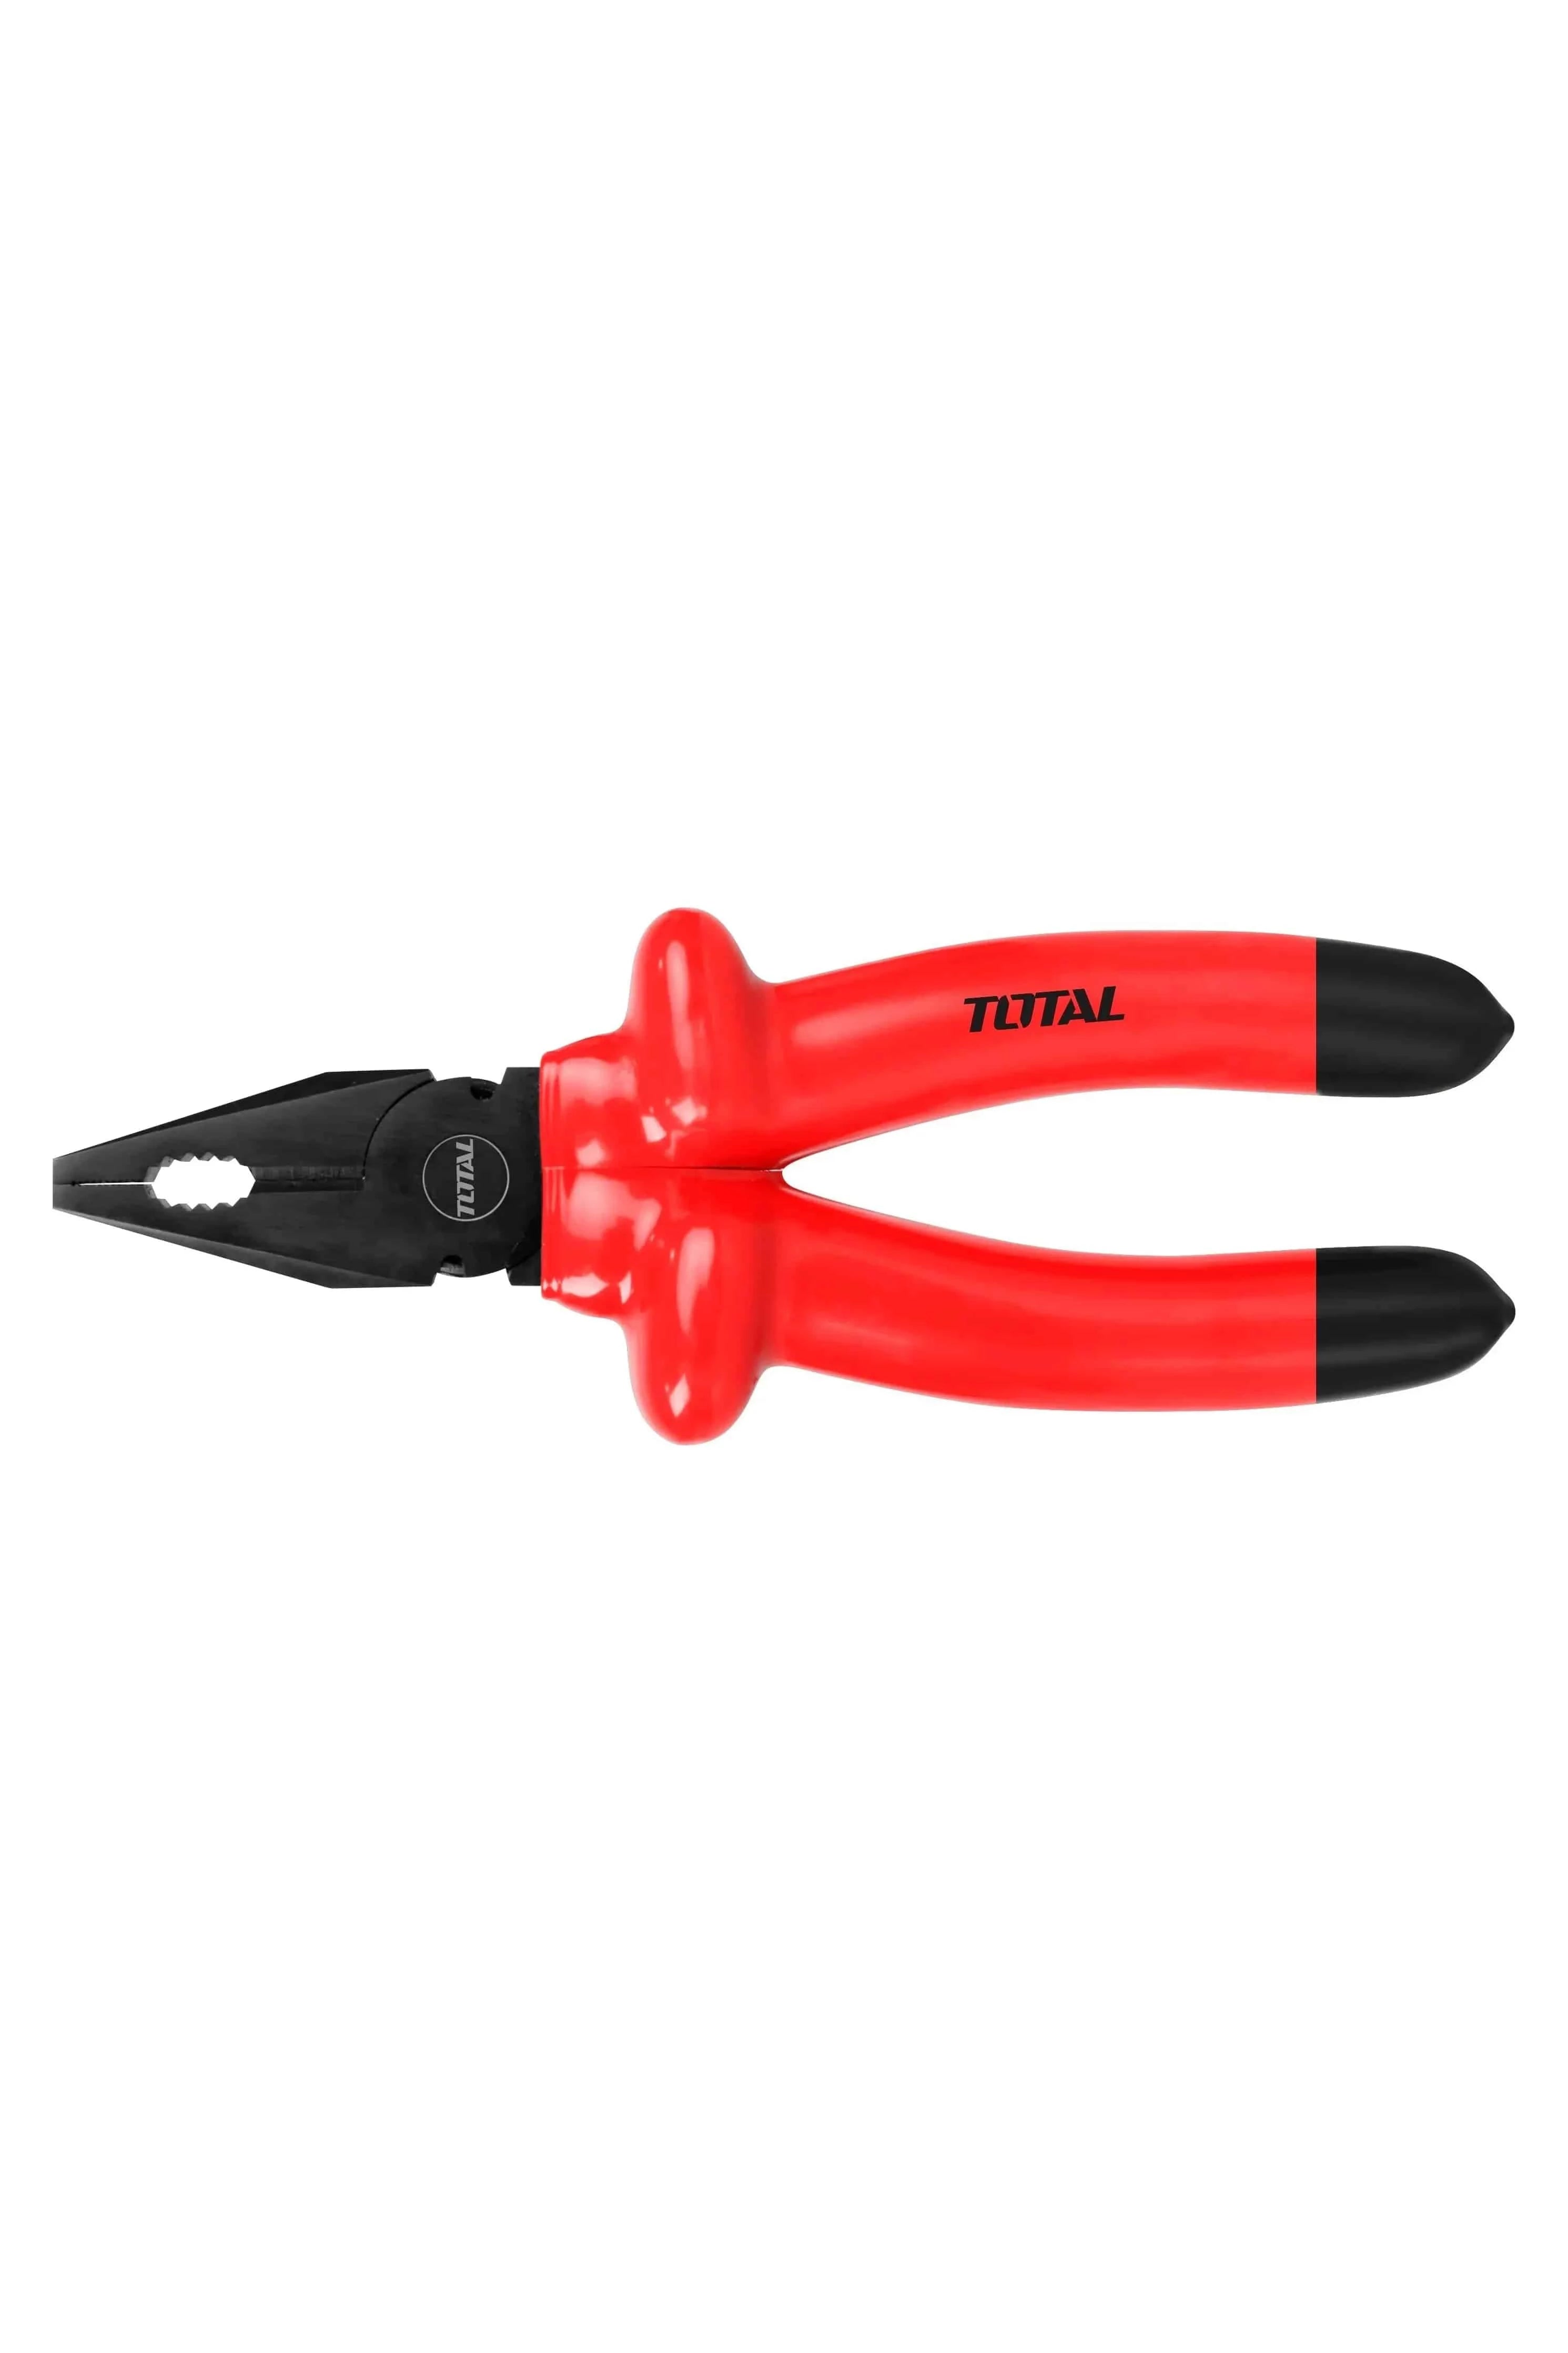 TOTAL INSULATED LONG NOSE PLIER DOUBLE INSULATED - Elite Renewable Solutions